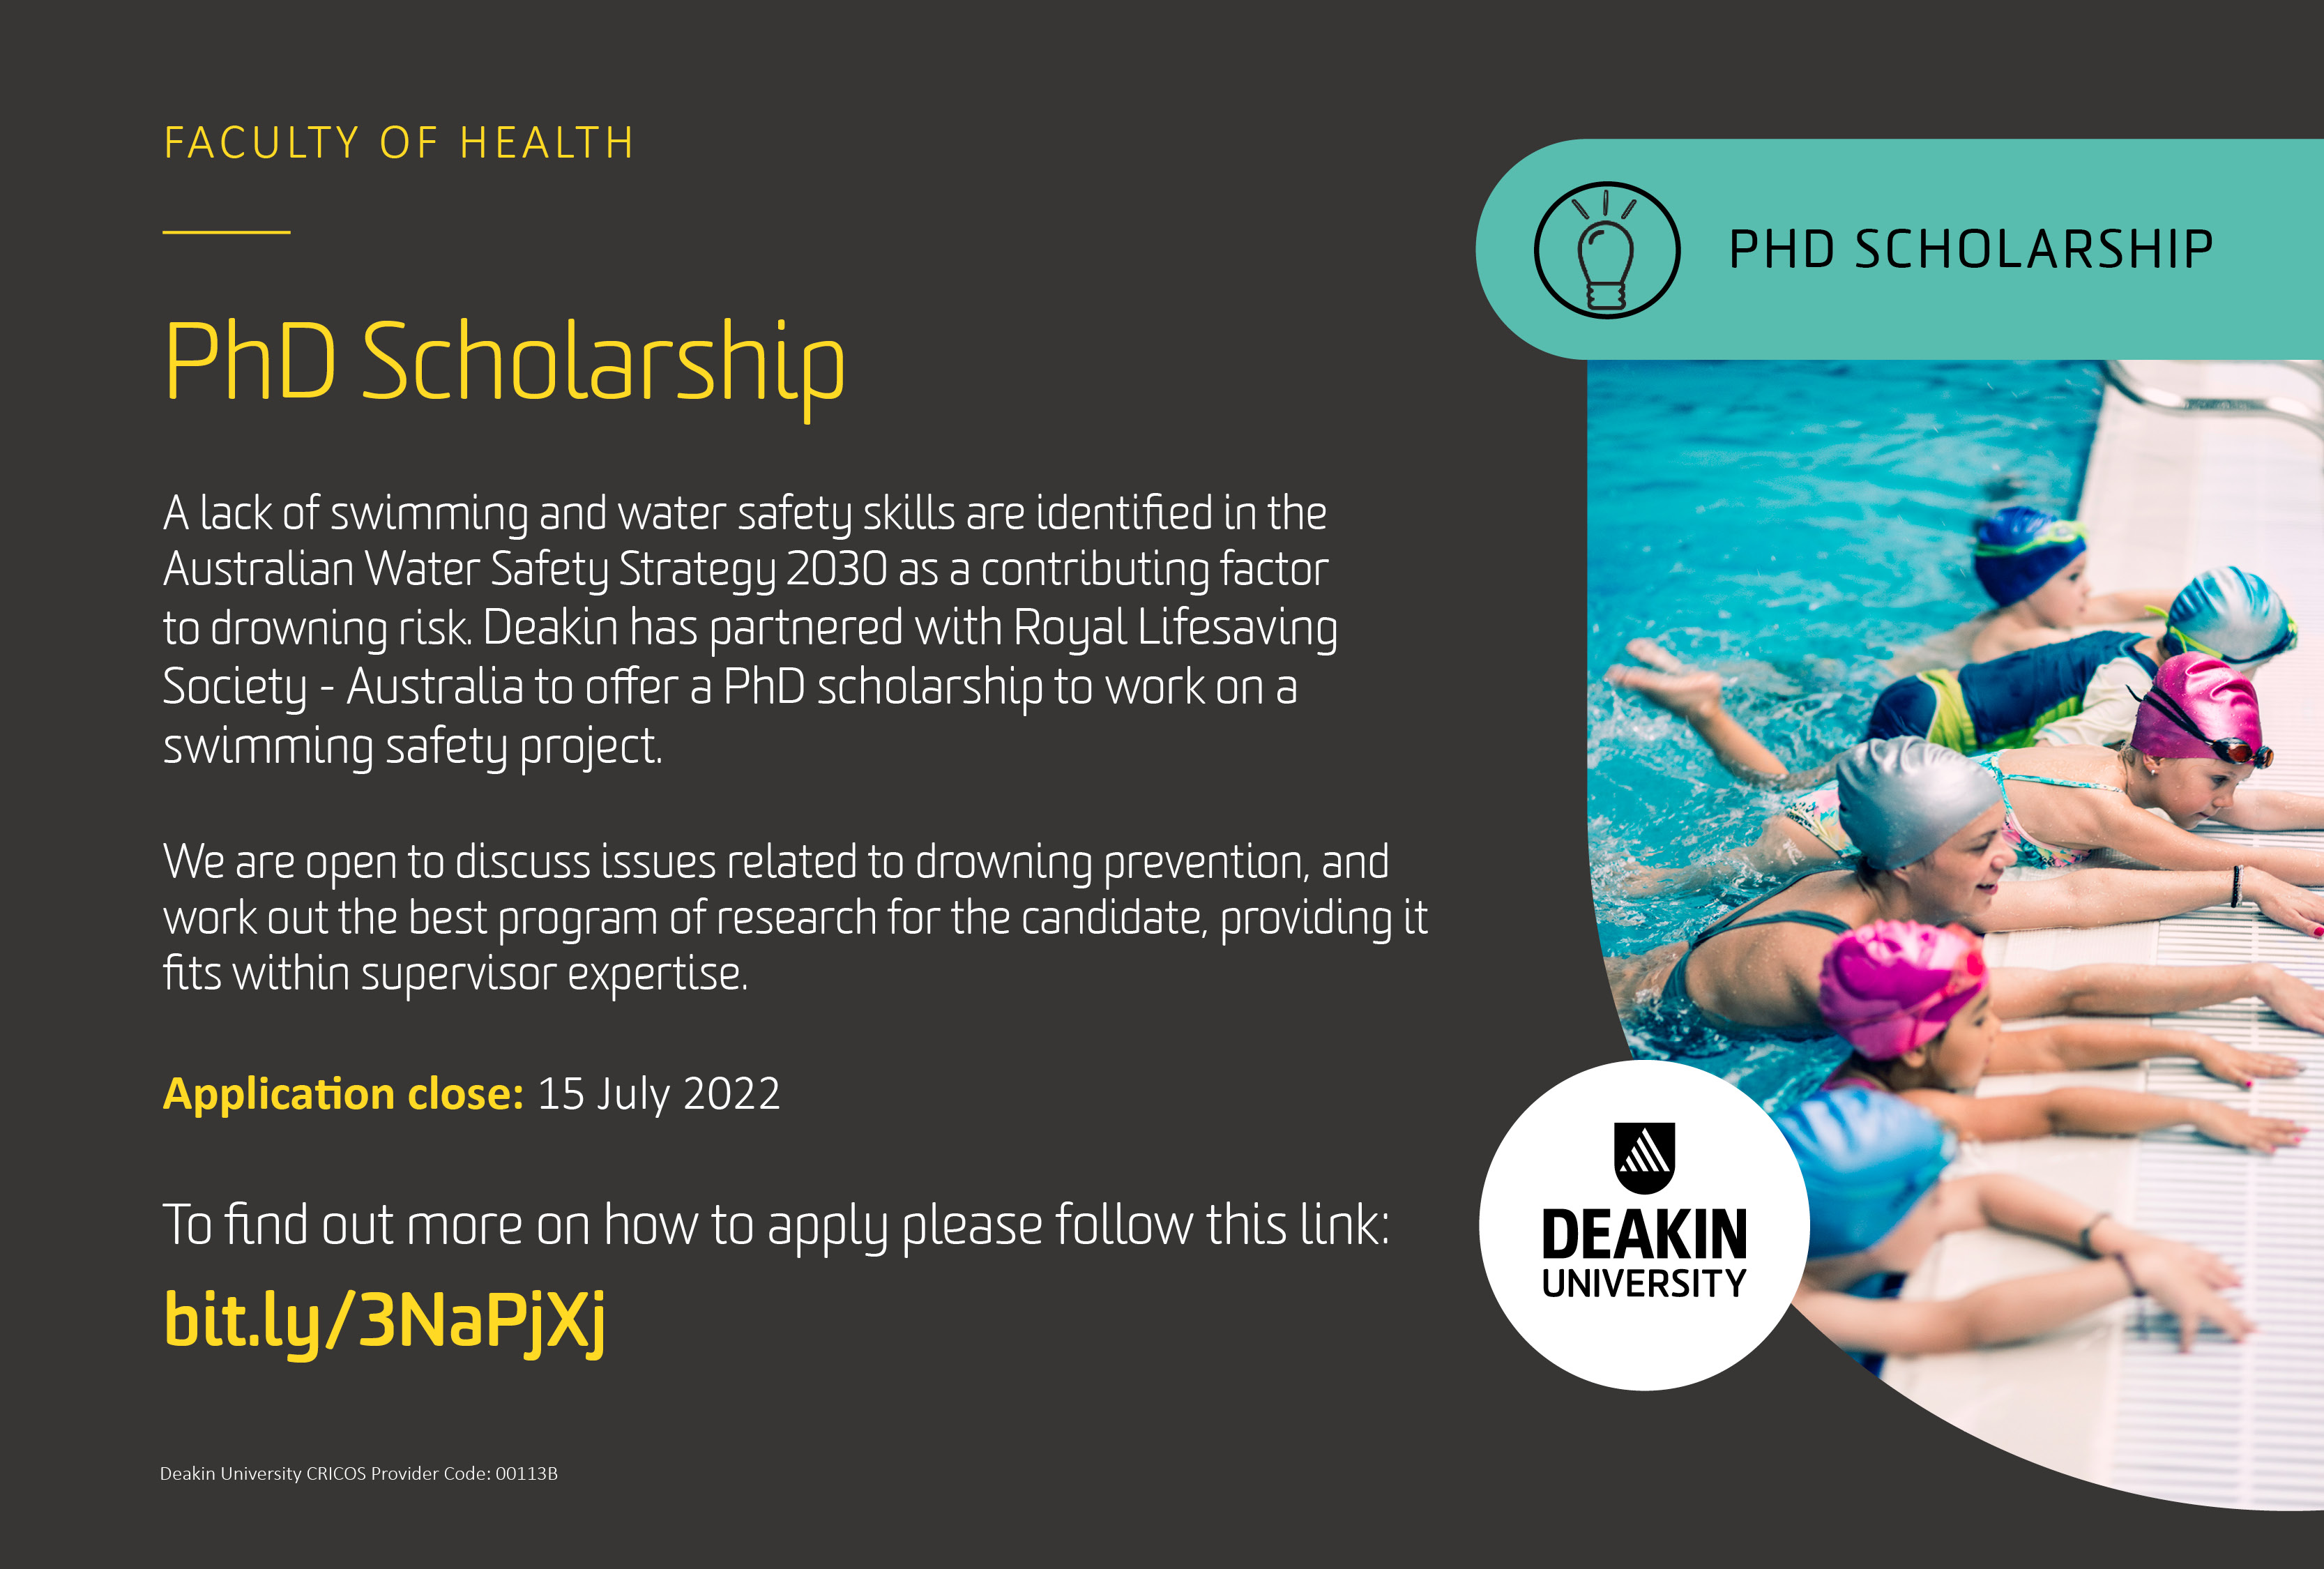 Deakin University and Royal Life Saving PHD Opportunity